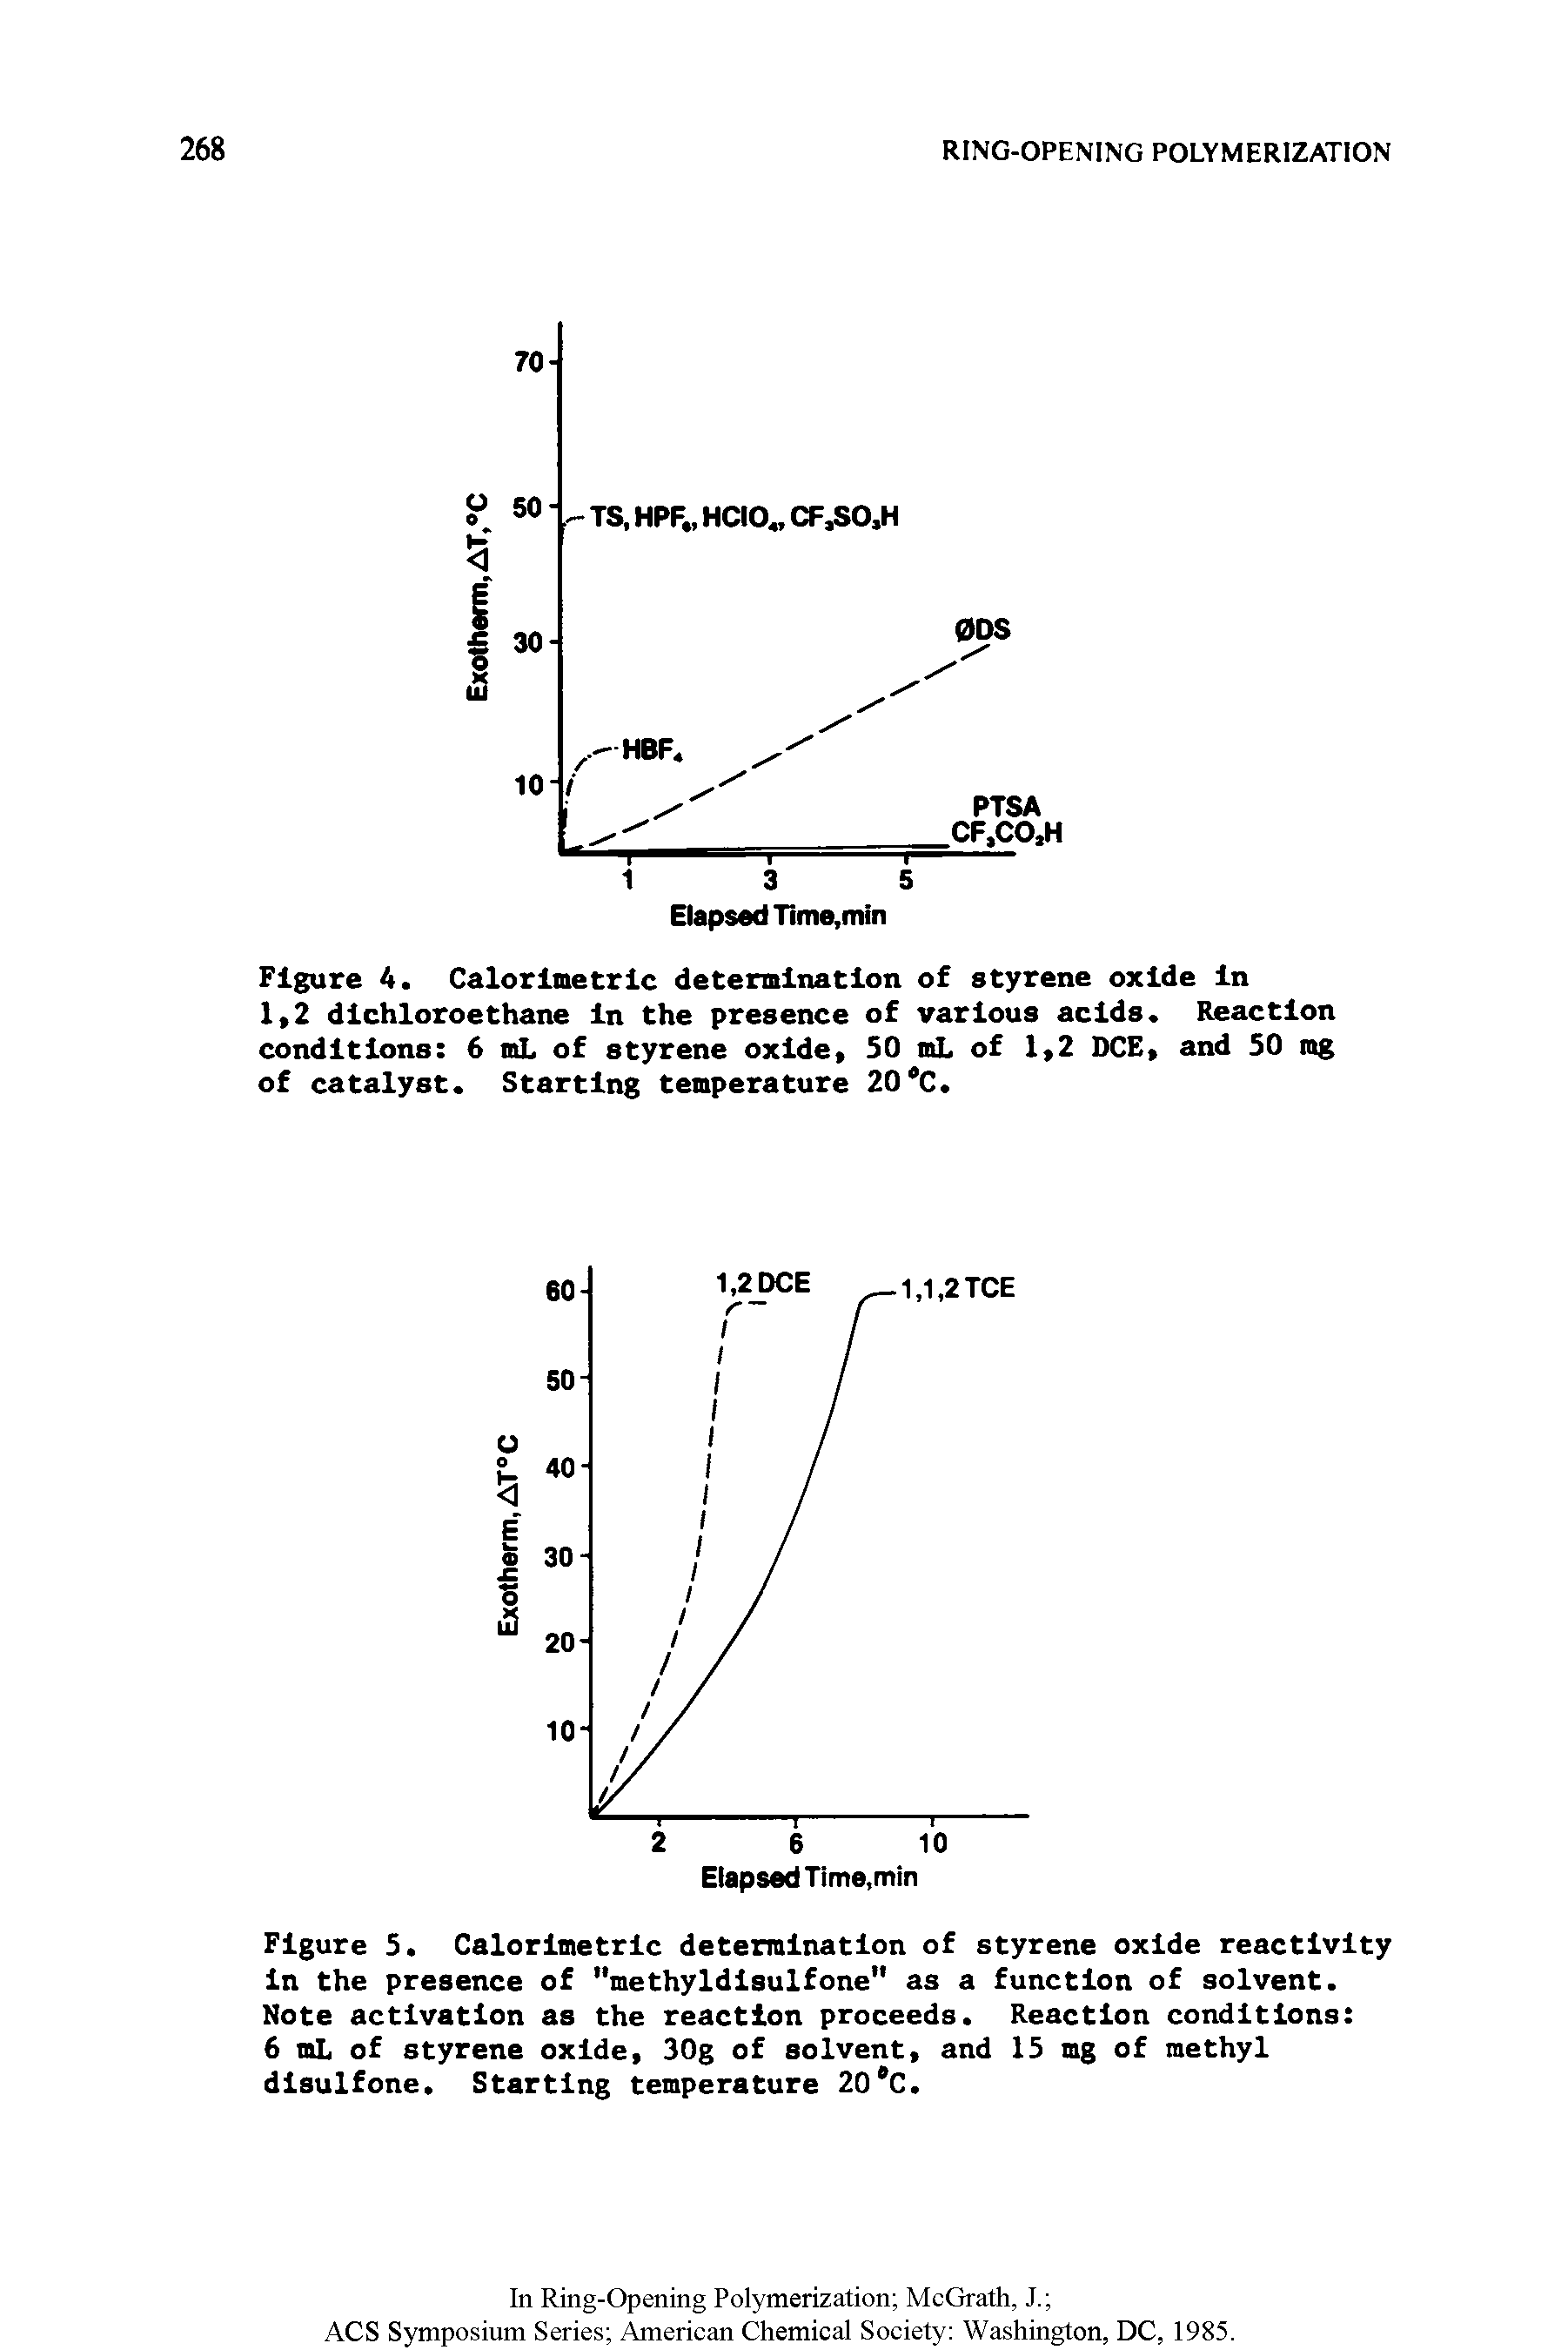 Figure 5. Calorimetric determination of styrene oxide reactivity In the presence of "methyldlsulfone" as a function of solvent. Note activation as the reaction proceeds. Reaction conditions ...